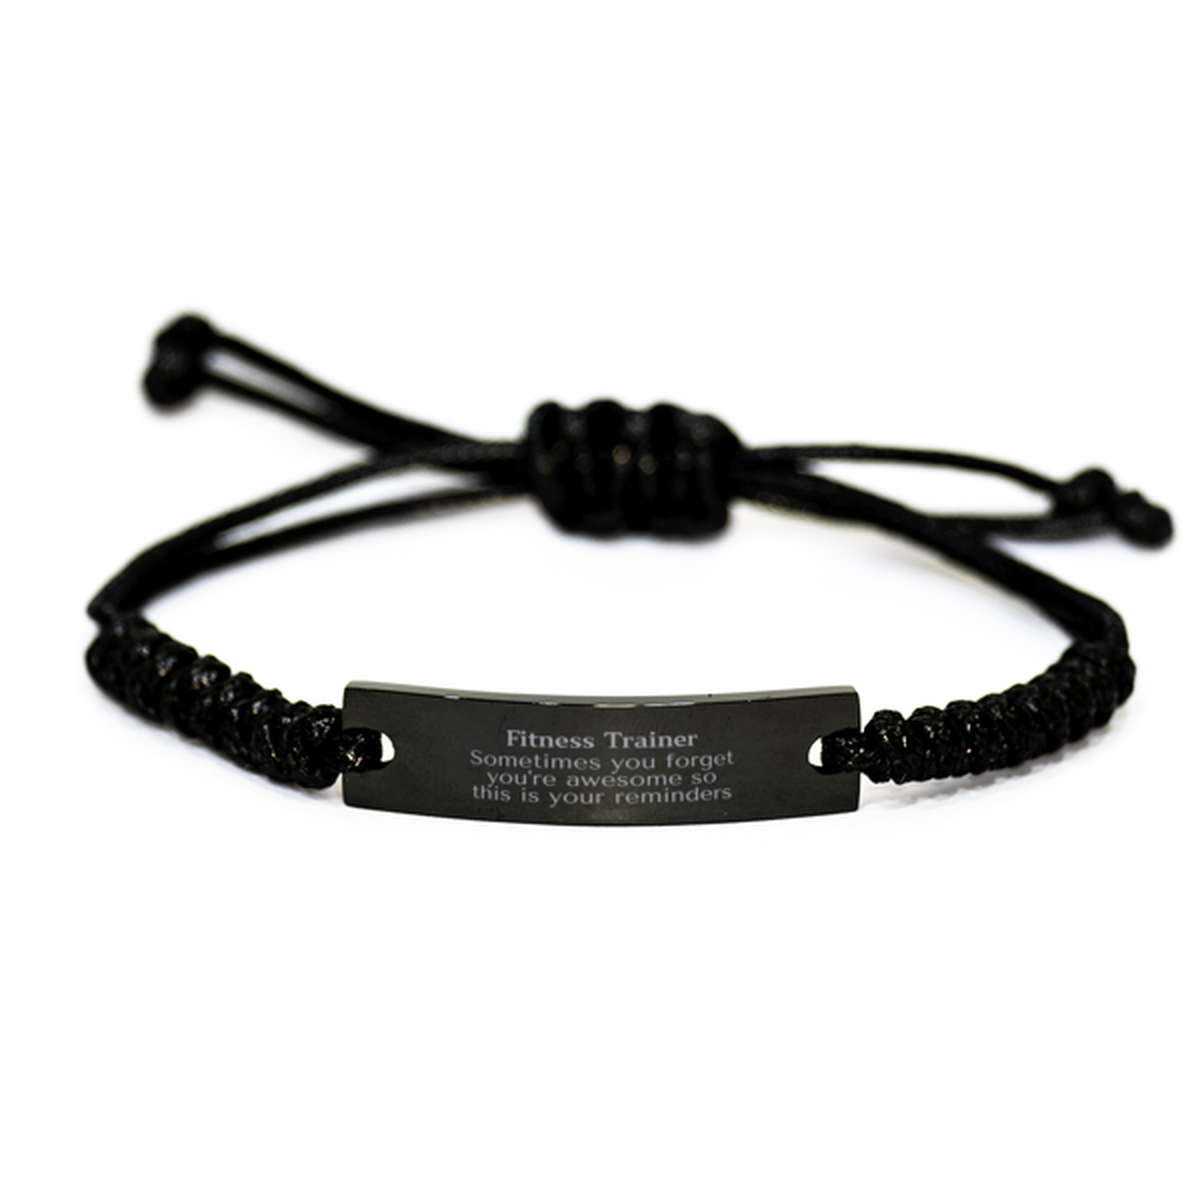 Sentimental Fitness Trainer Black Rope Bracelet, Fitness Trainer Sometimes you forget you're awesome so this is your reminders, Graduation Christmas Birthday Gifts for Fitness Trainer, Men, Women, Coworkers